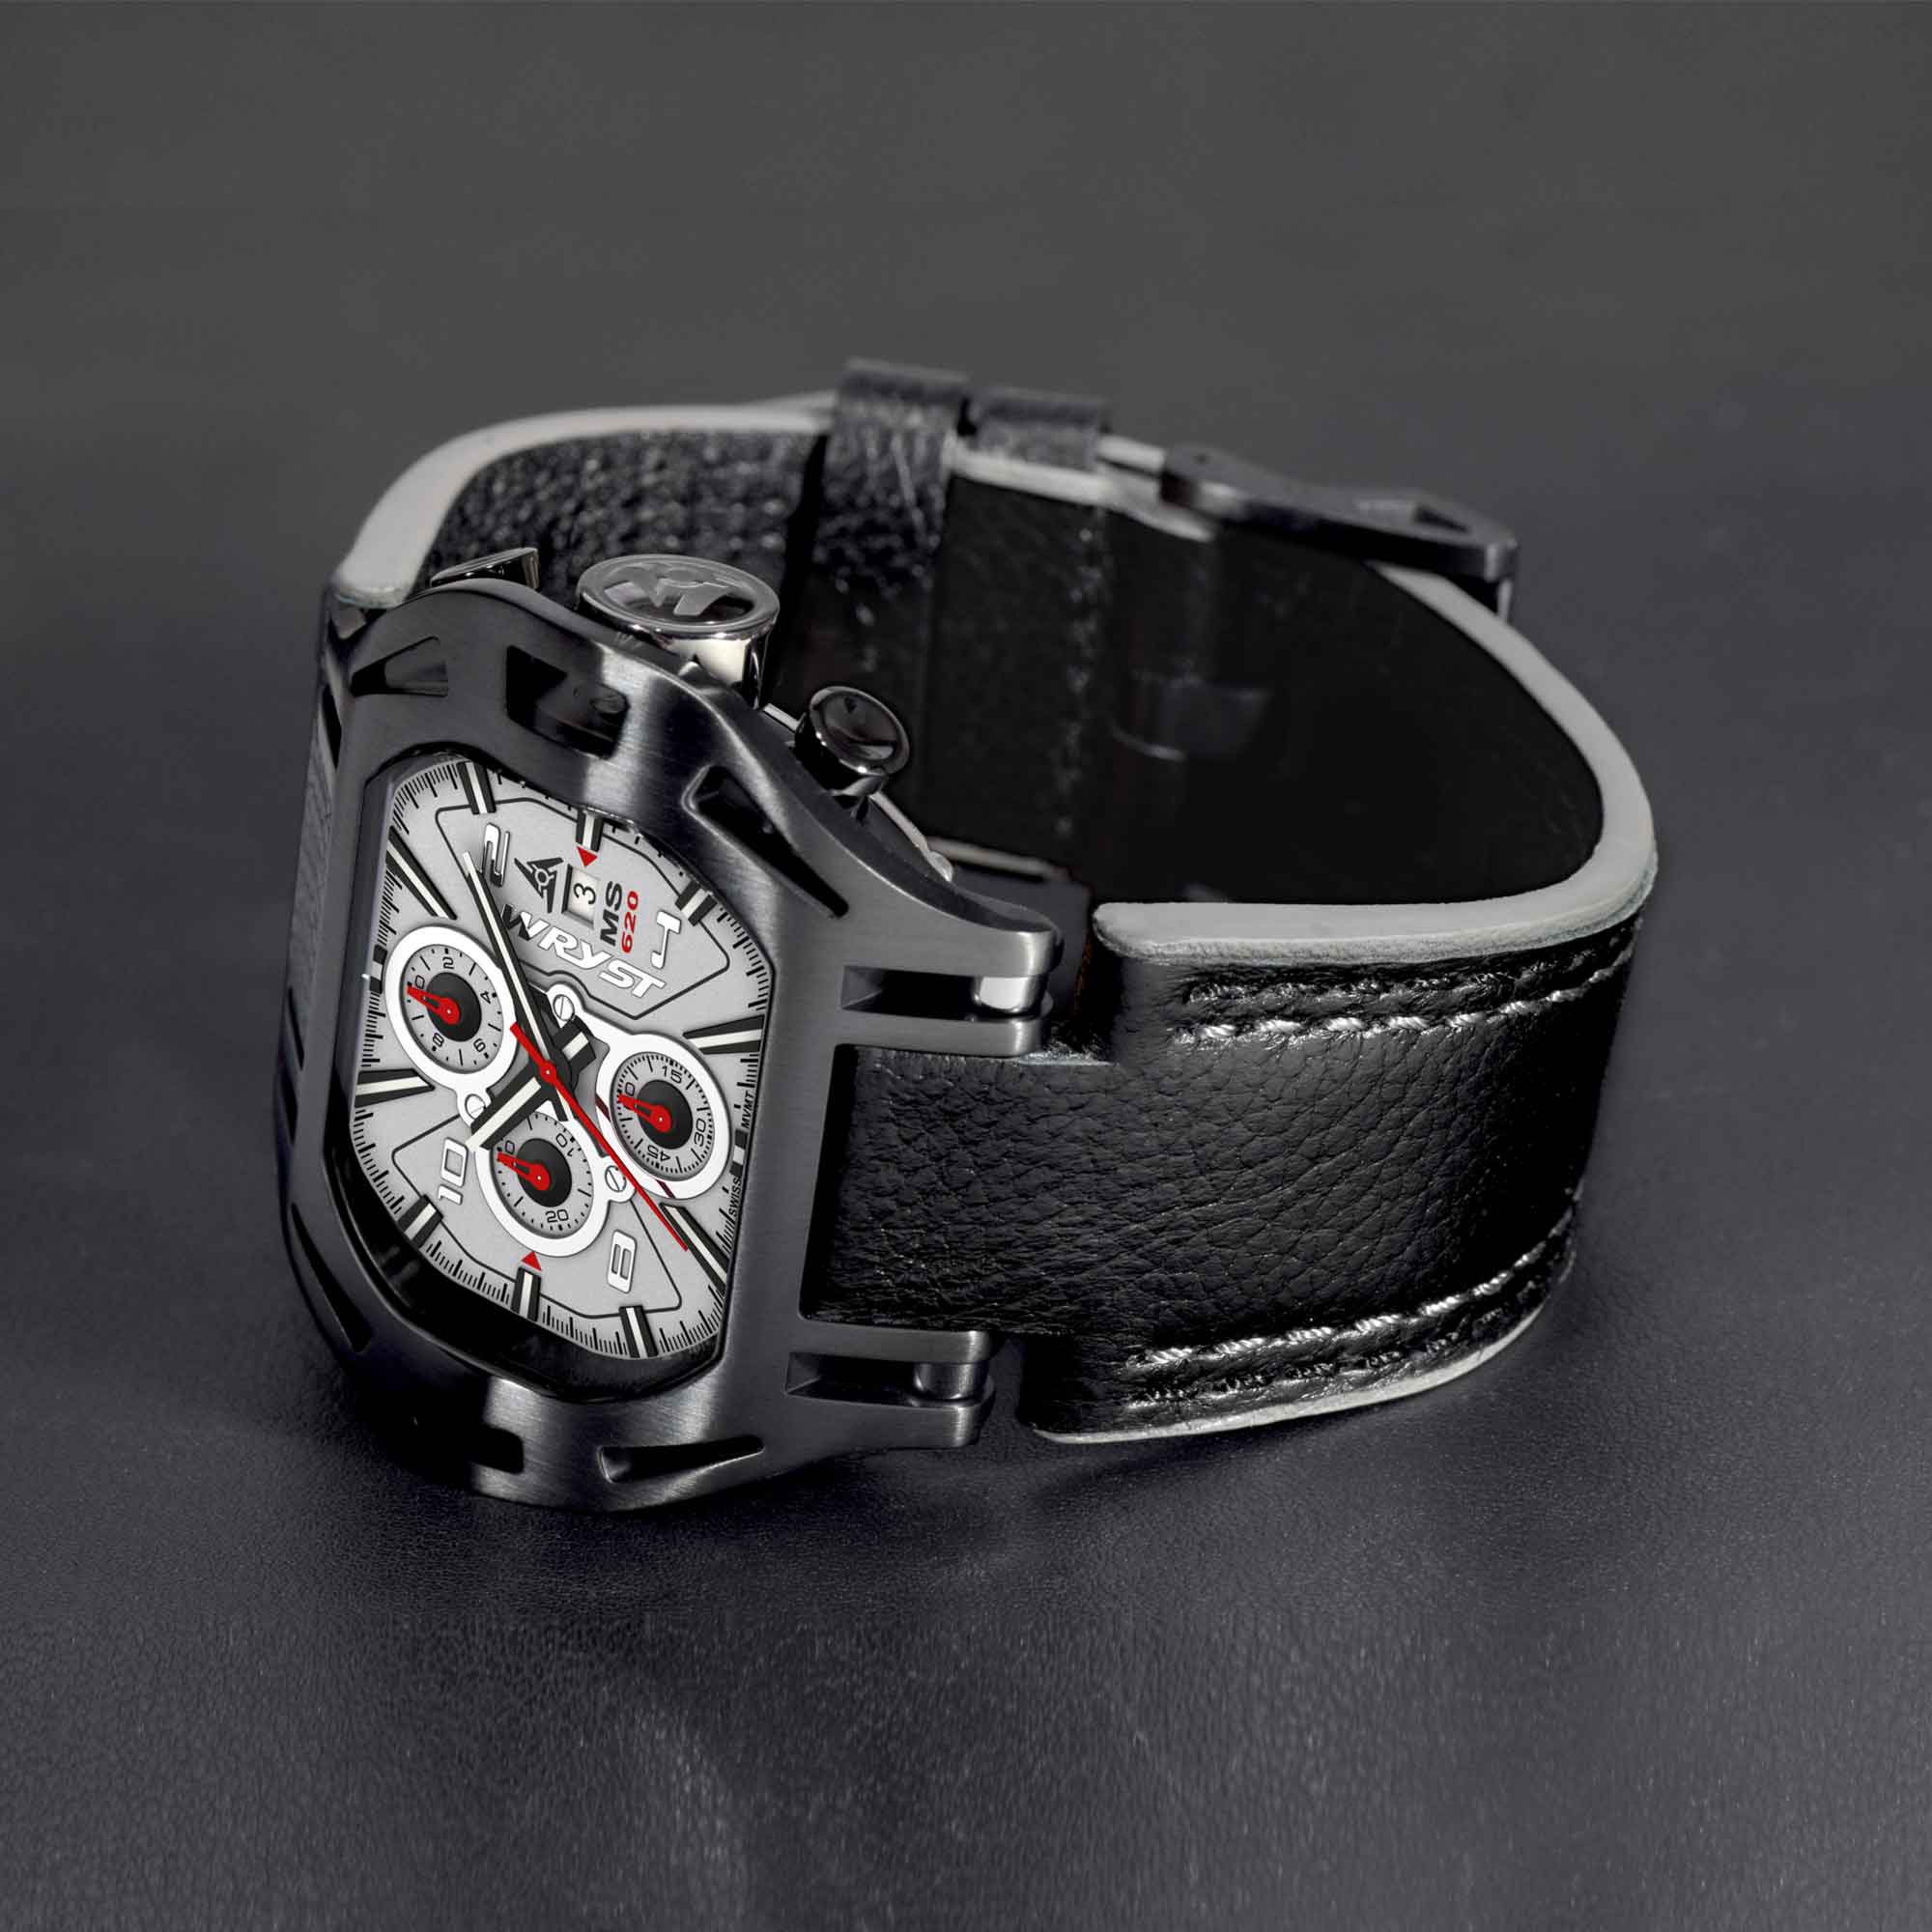 Black Racing Watches for Motorsports